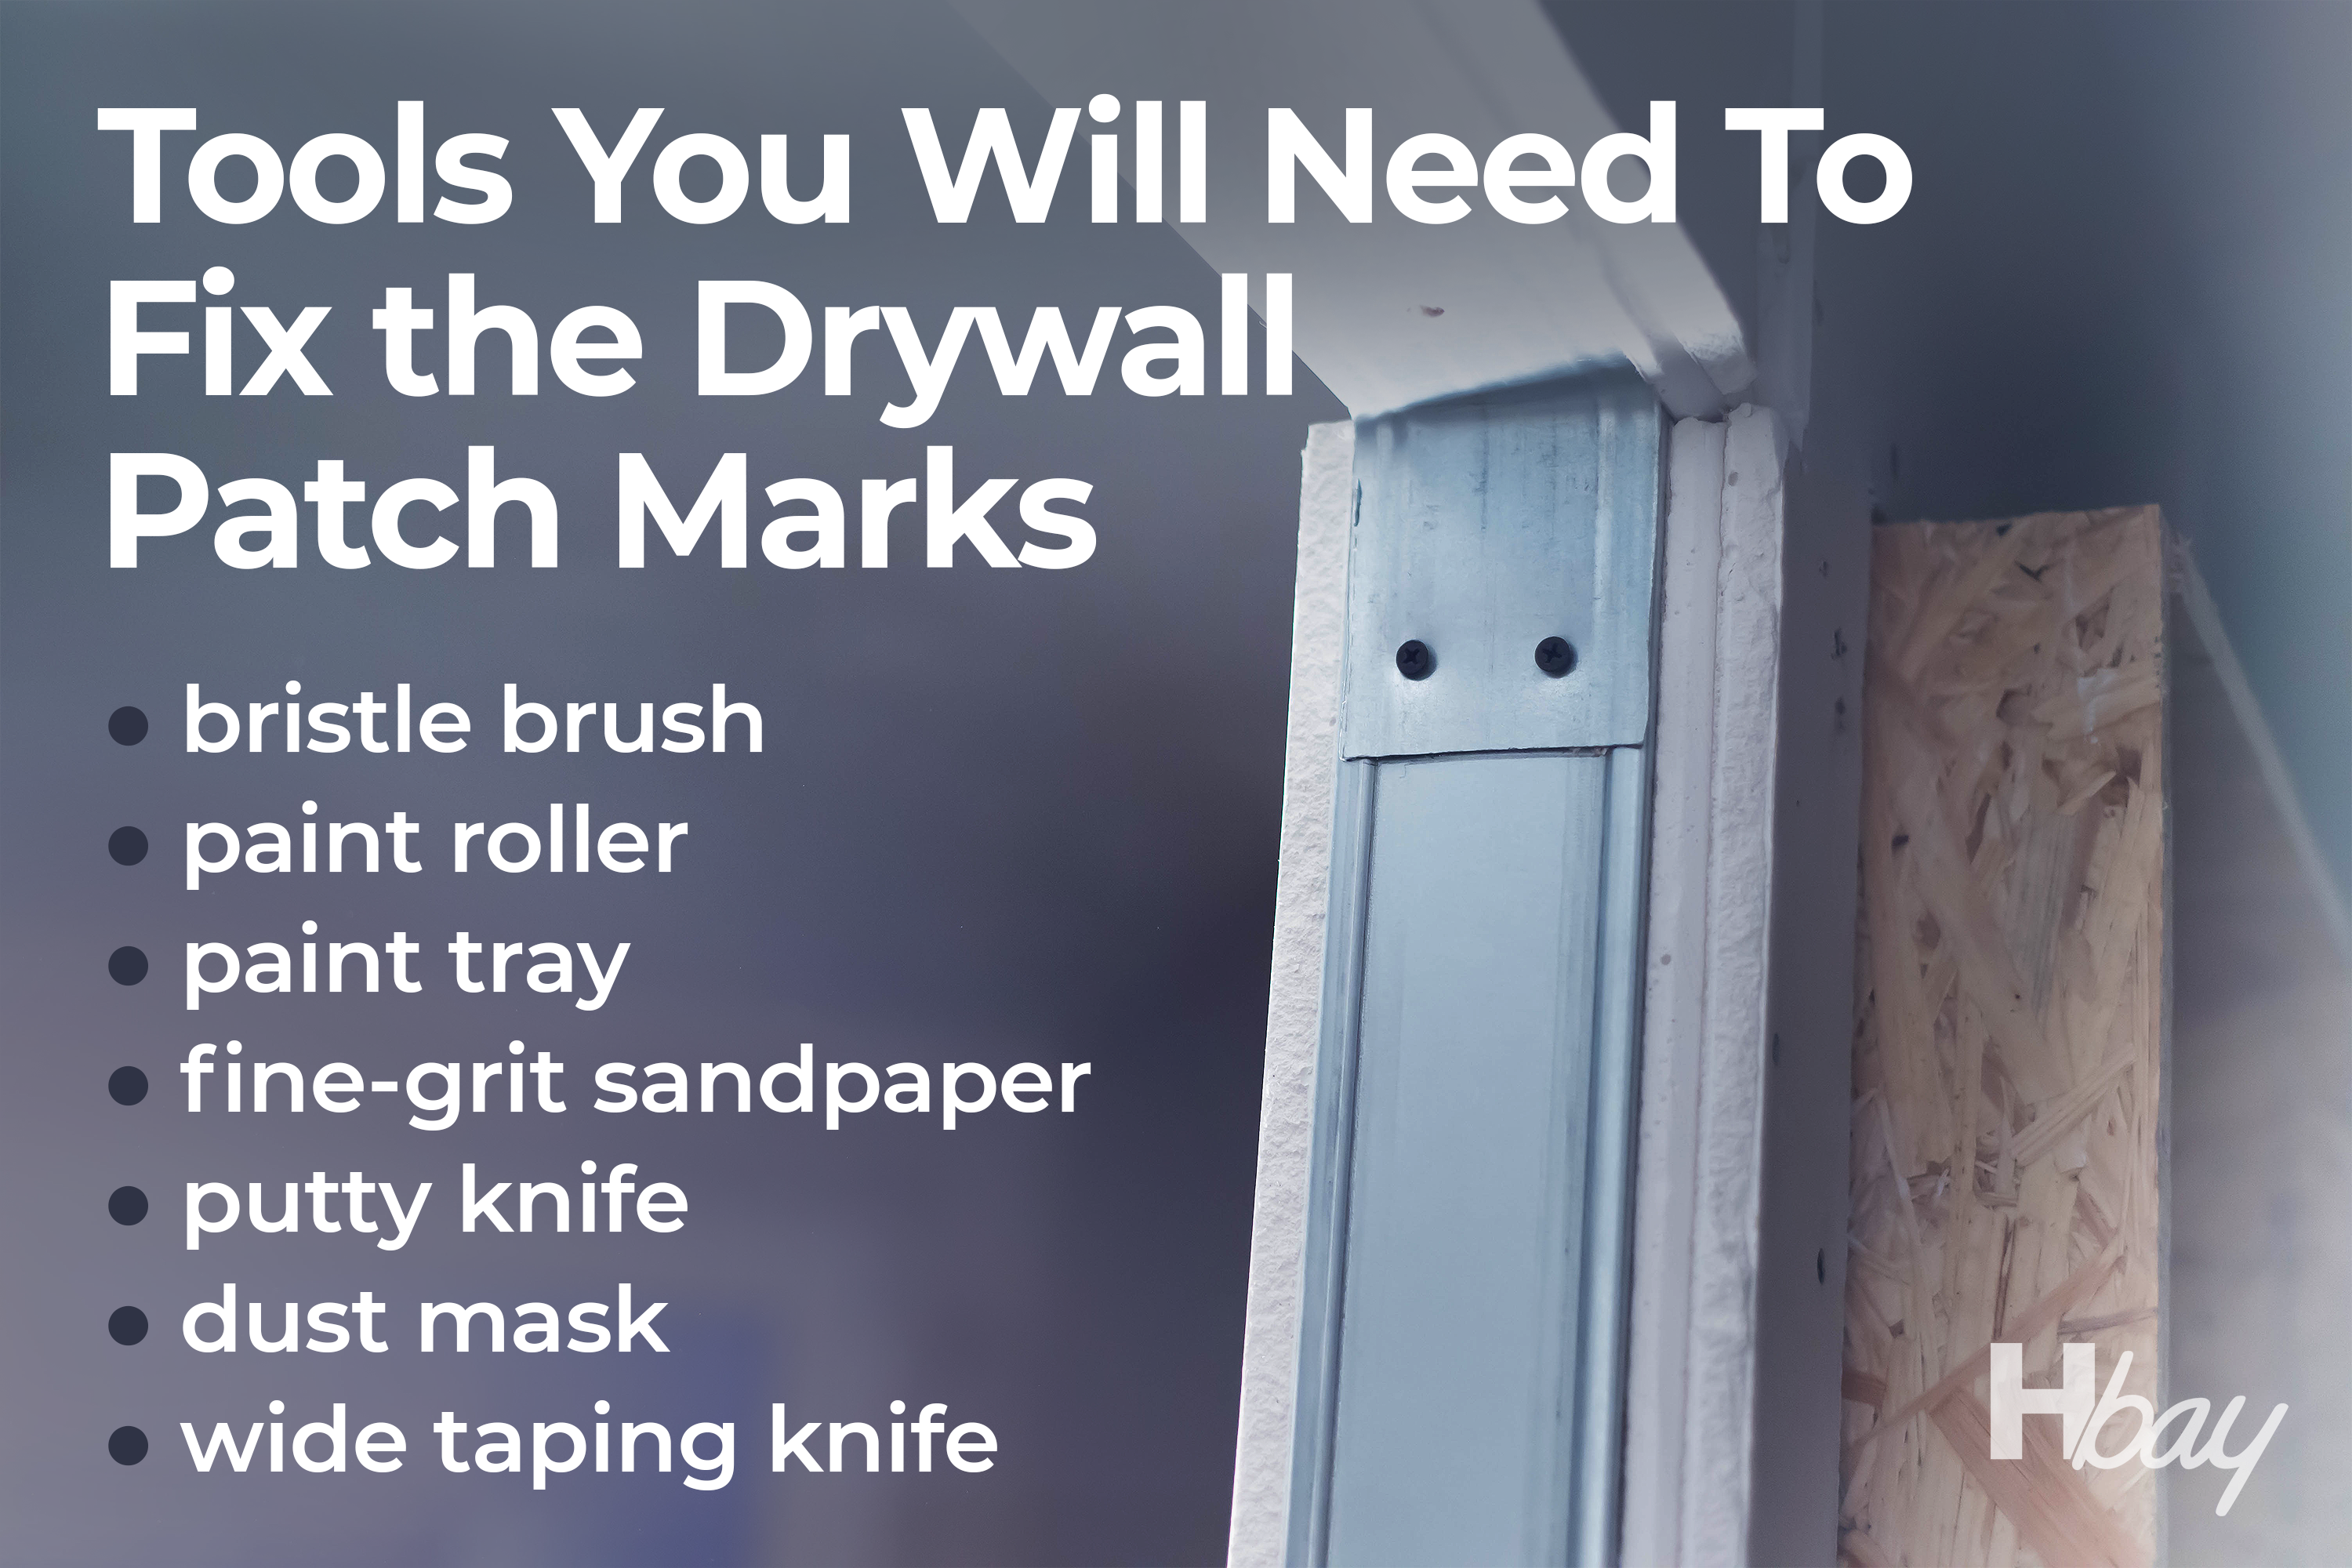 What Tools You Will Need For Fixing the Drywall Patch Marks